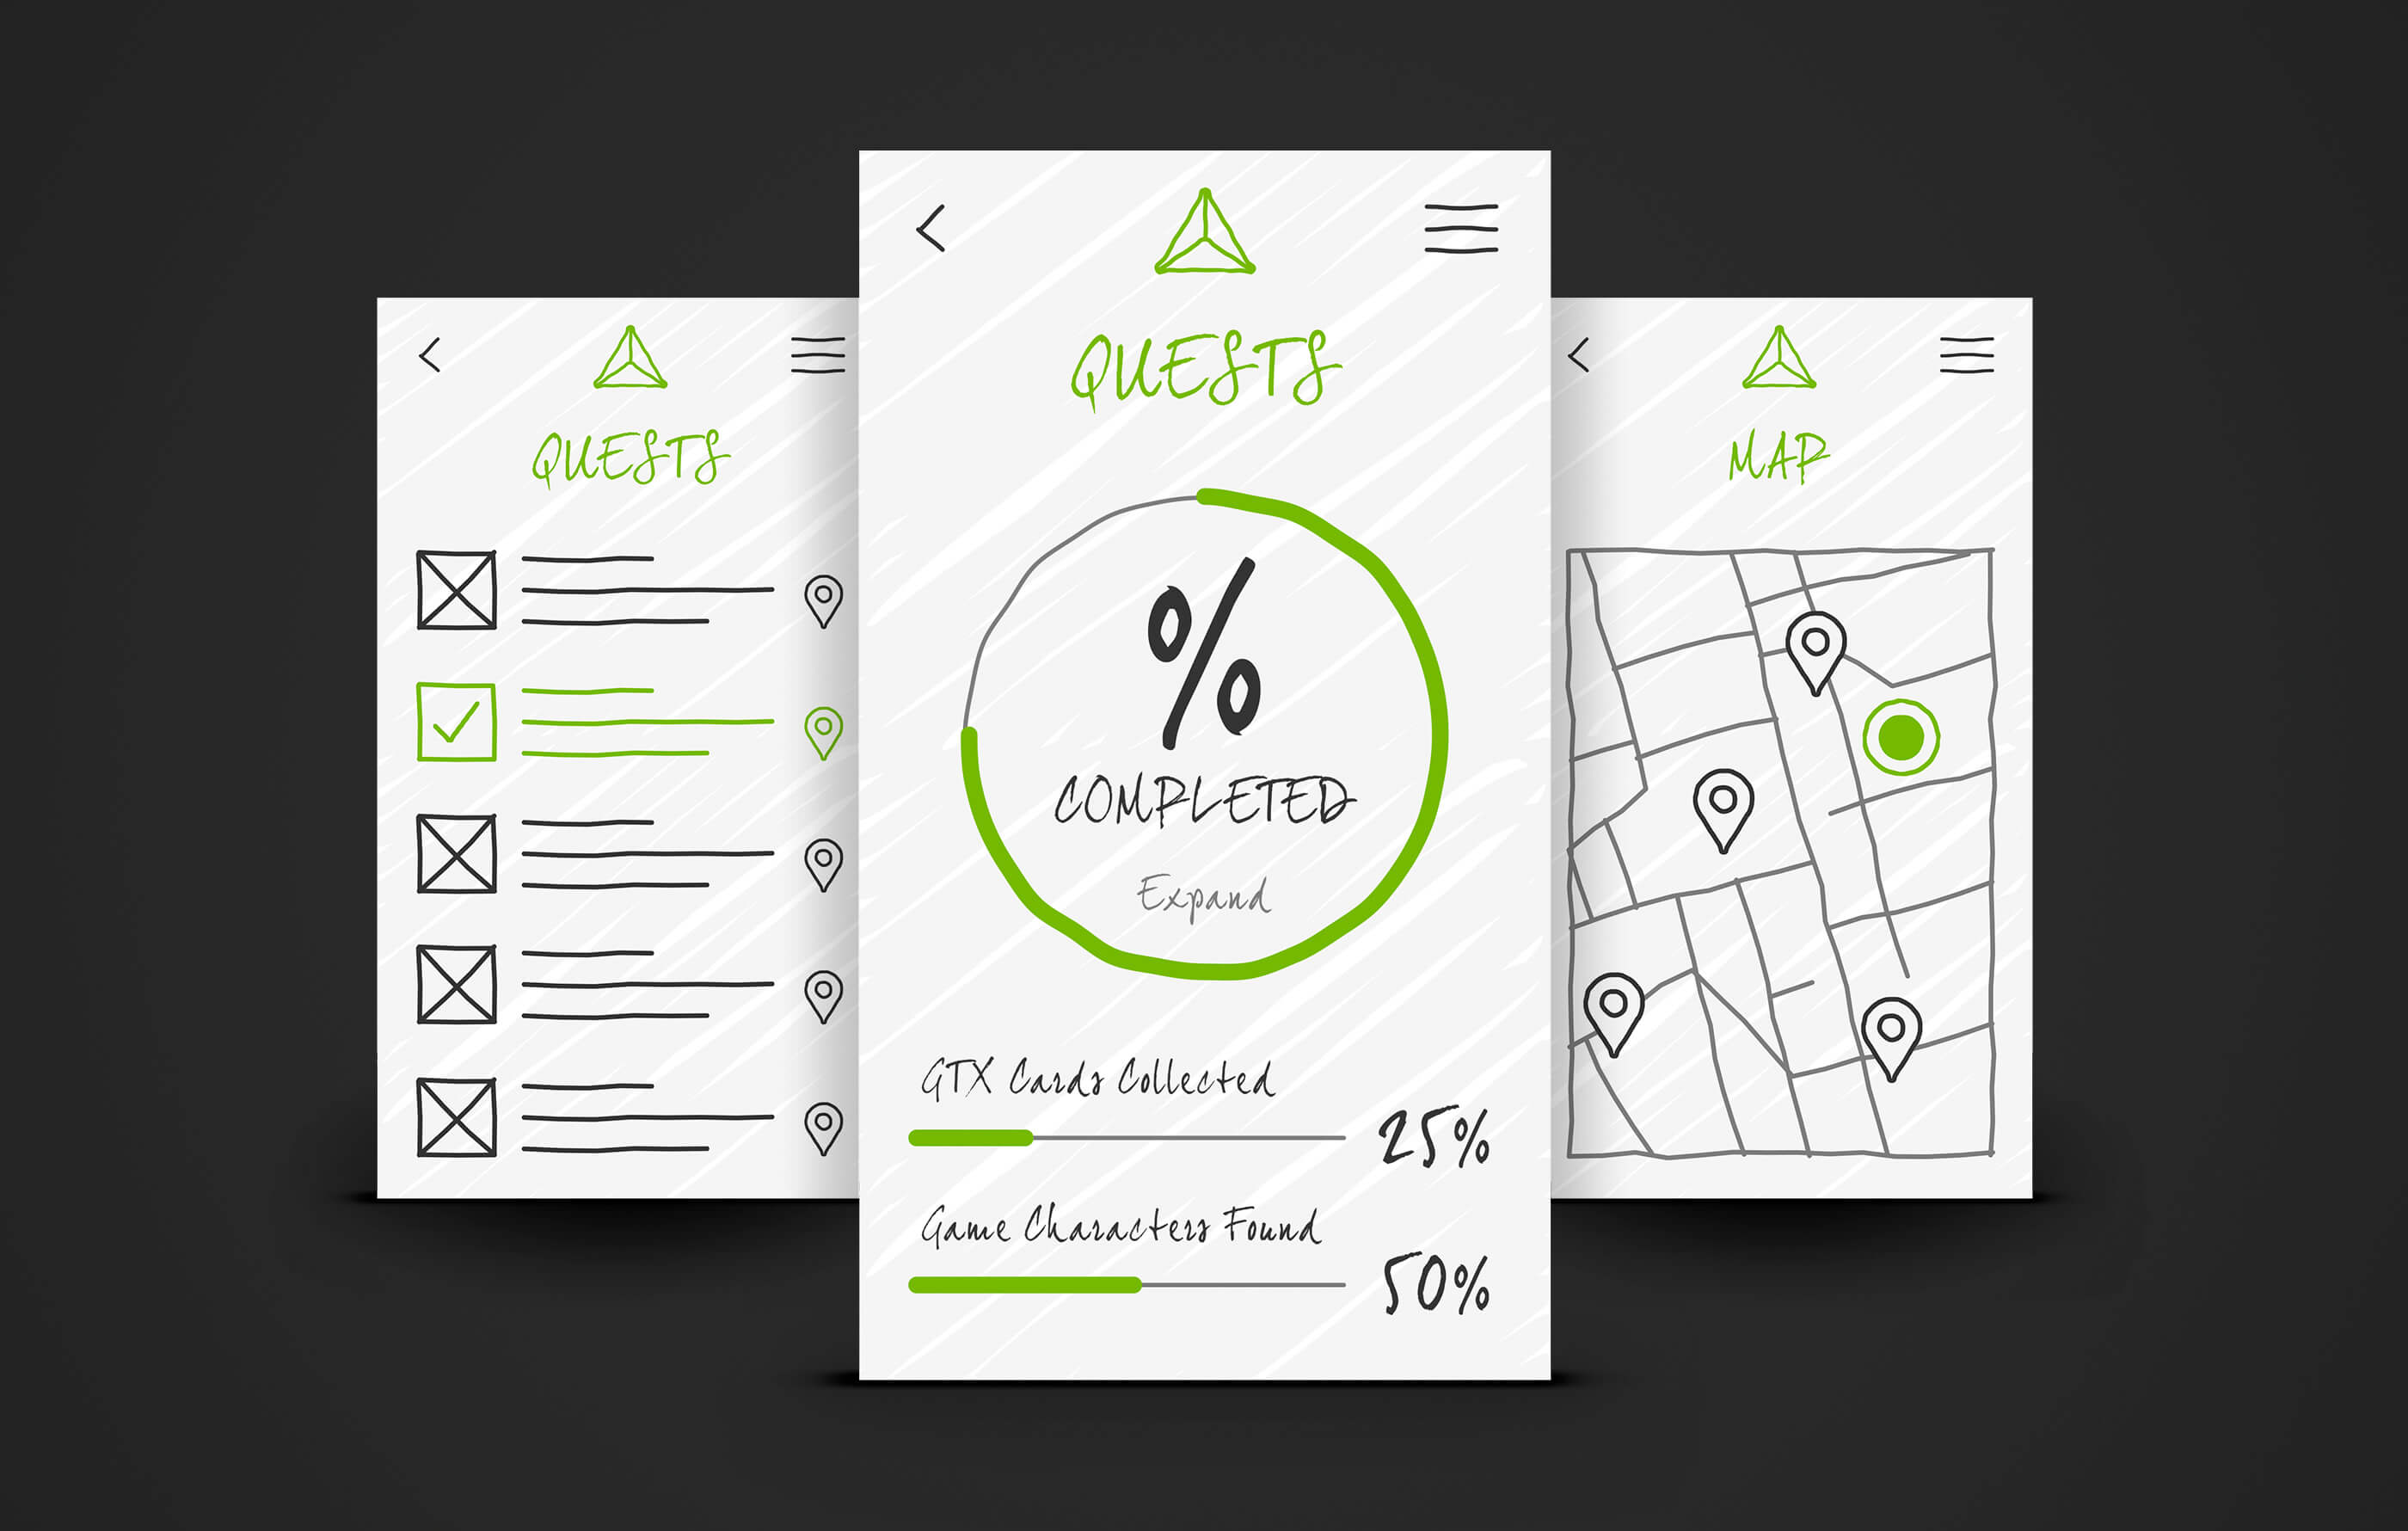 Interface wireframe sketches showing the list of GTX quests, completion screen with percentage summary and interactive map